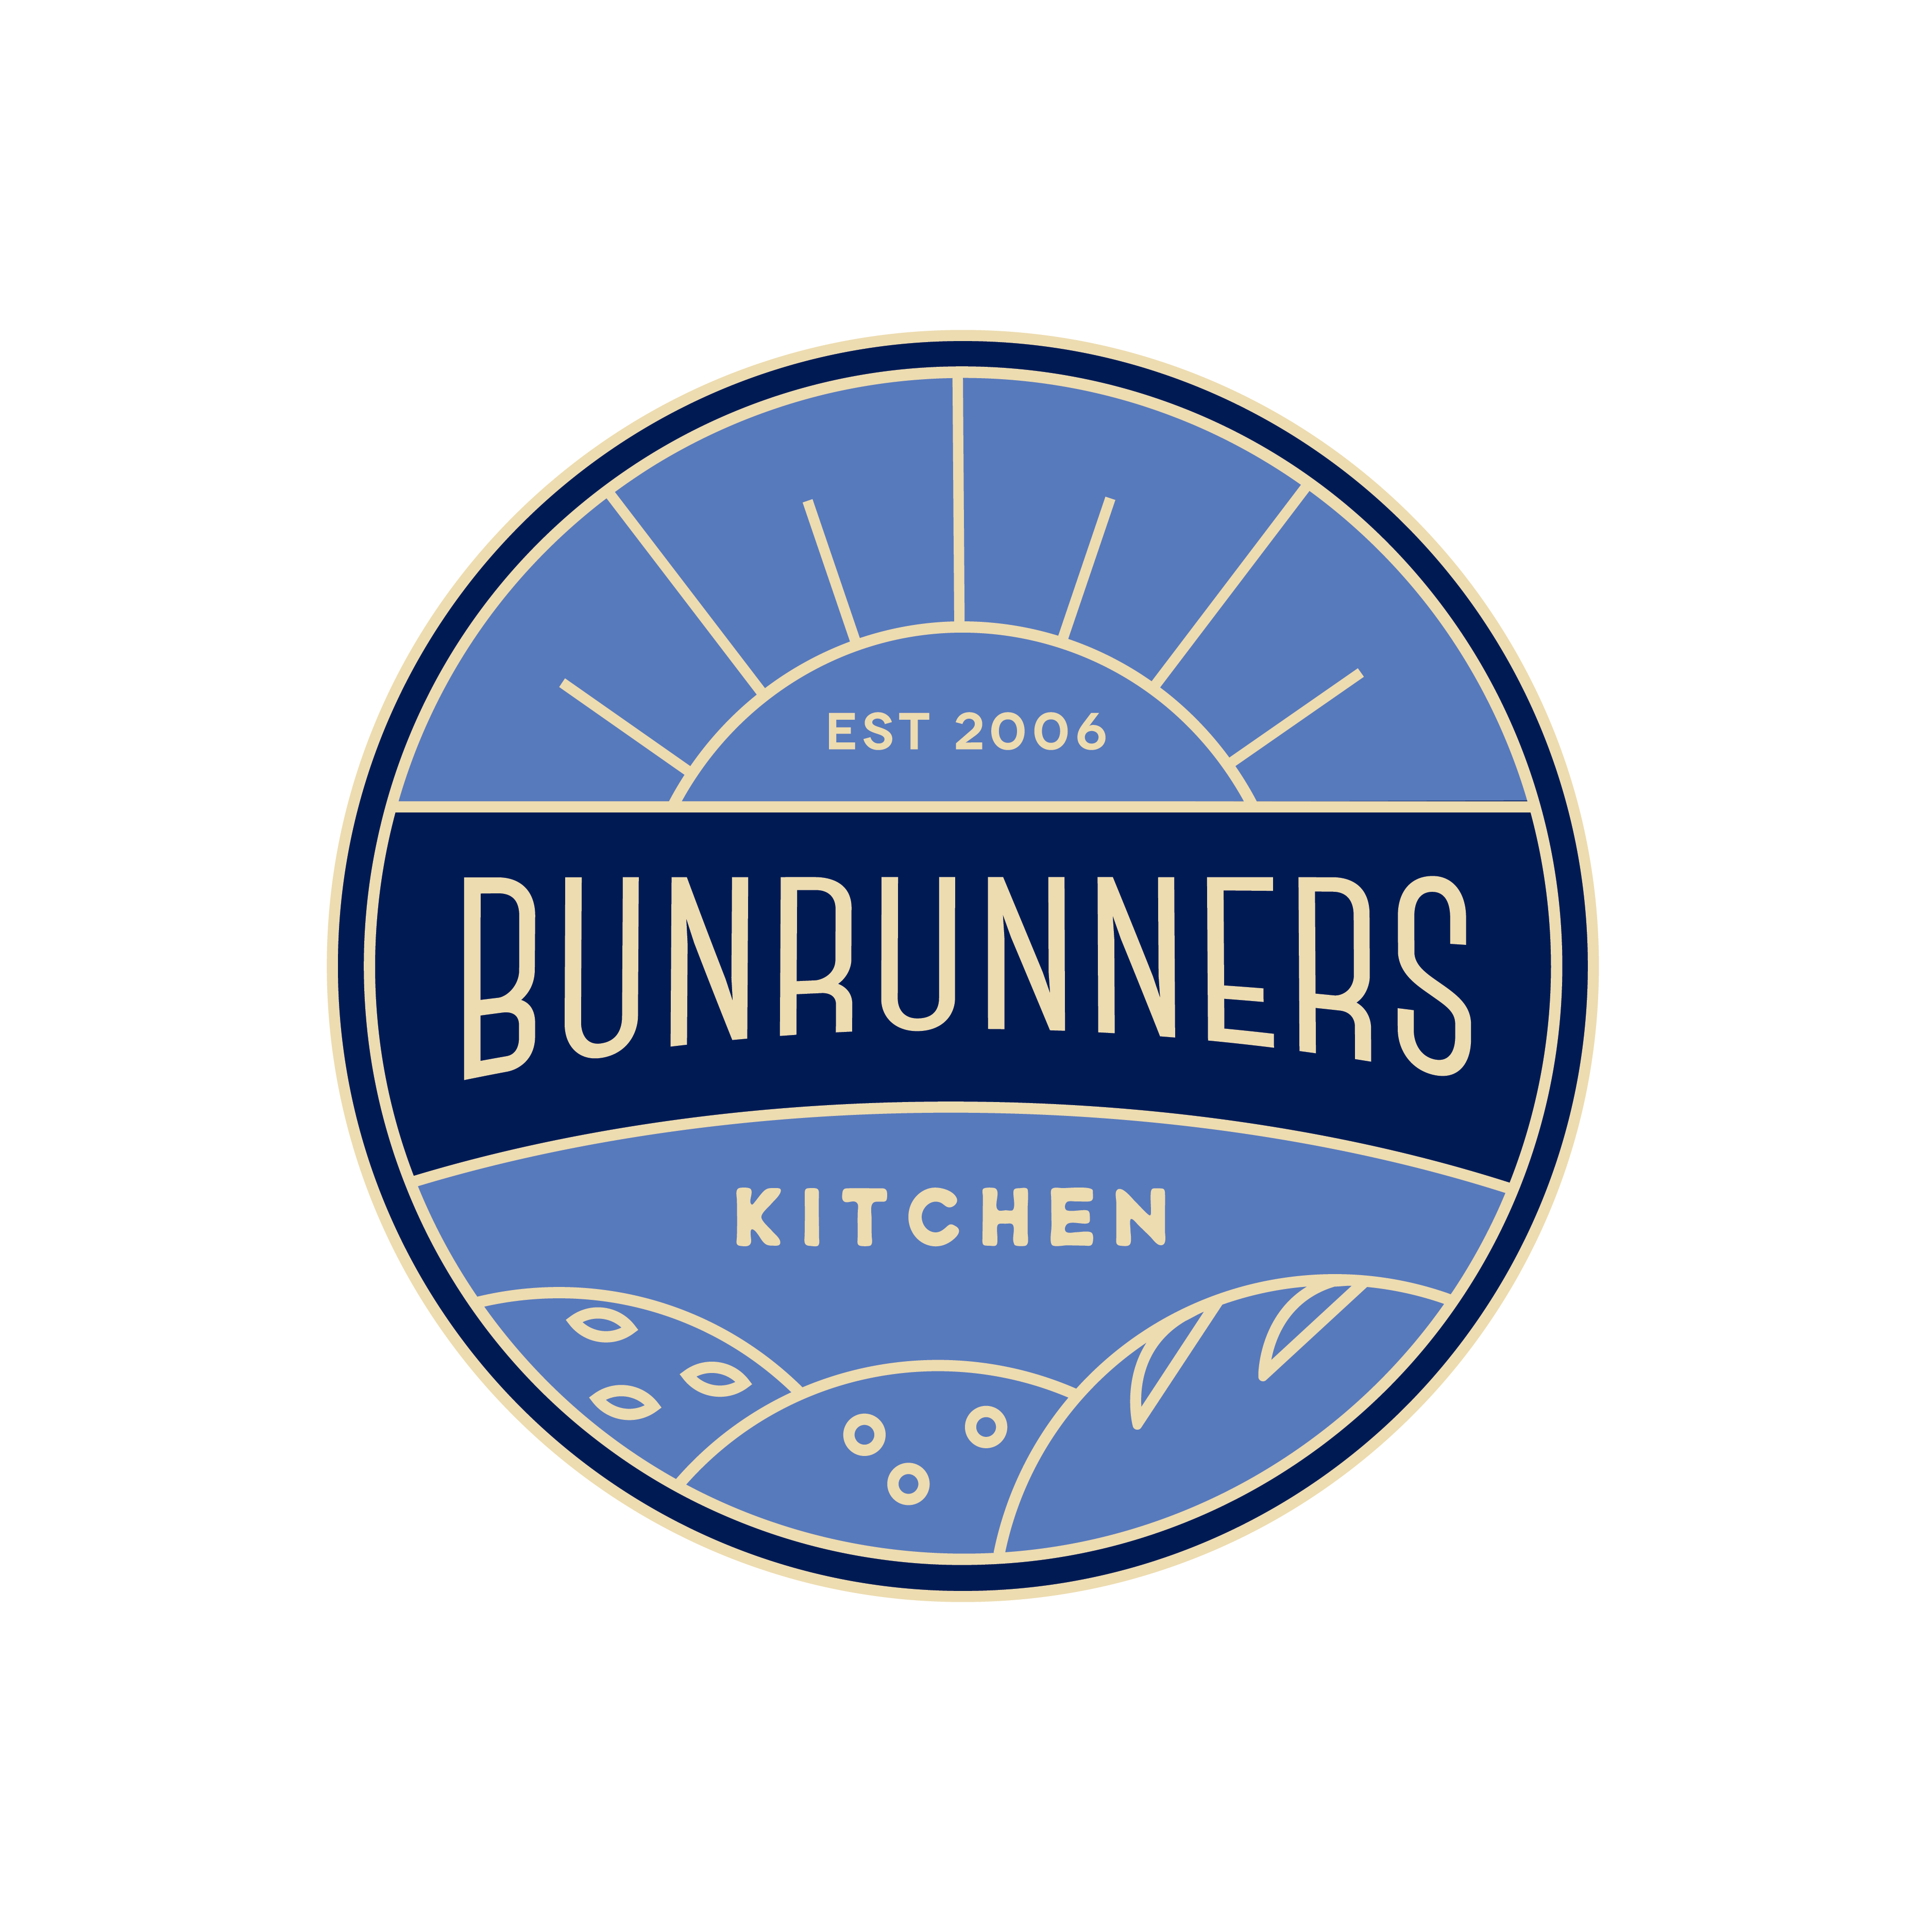 Bunrunners logo design by logo designer thoughtfields for your inspiration and for the worlds largest logo competition